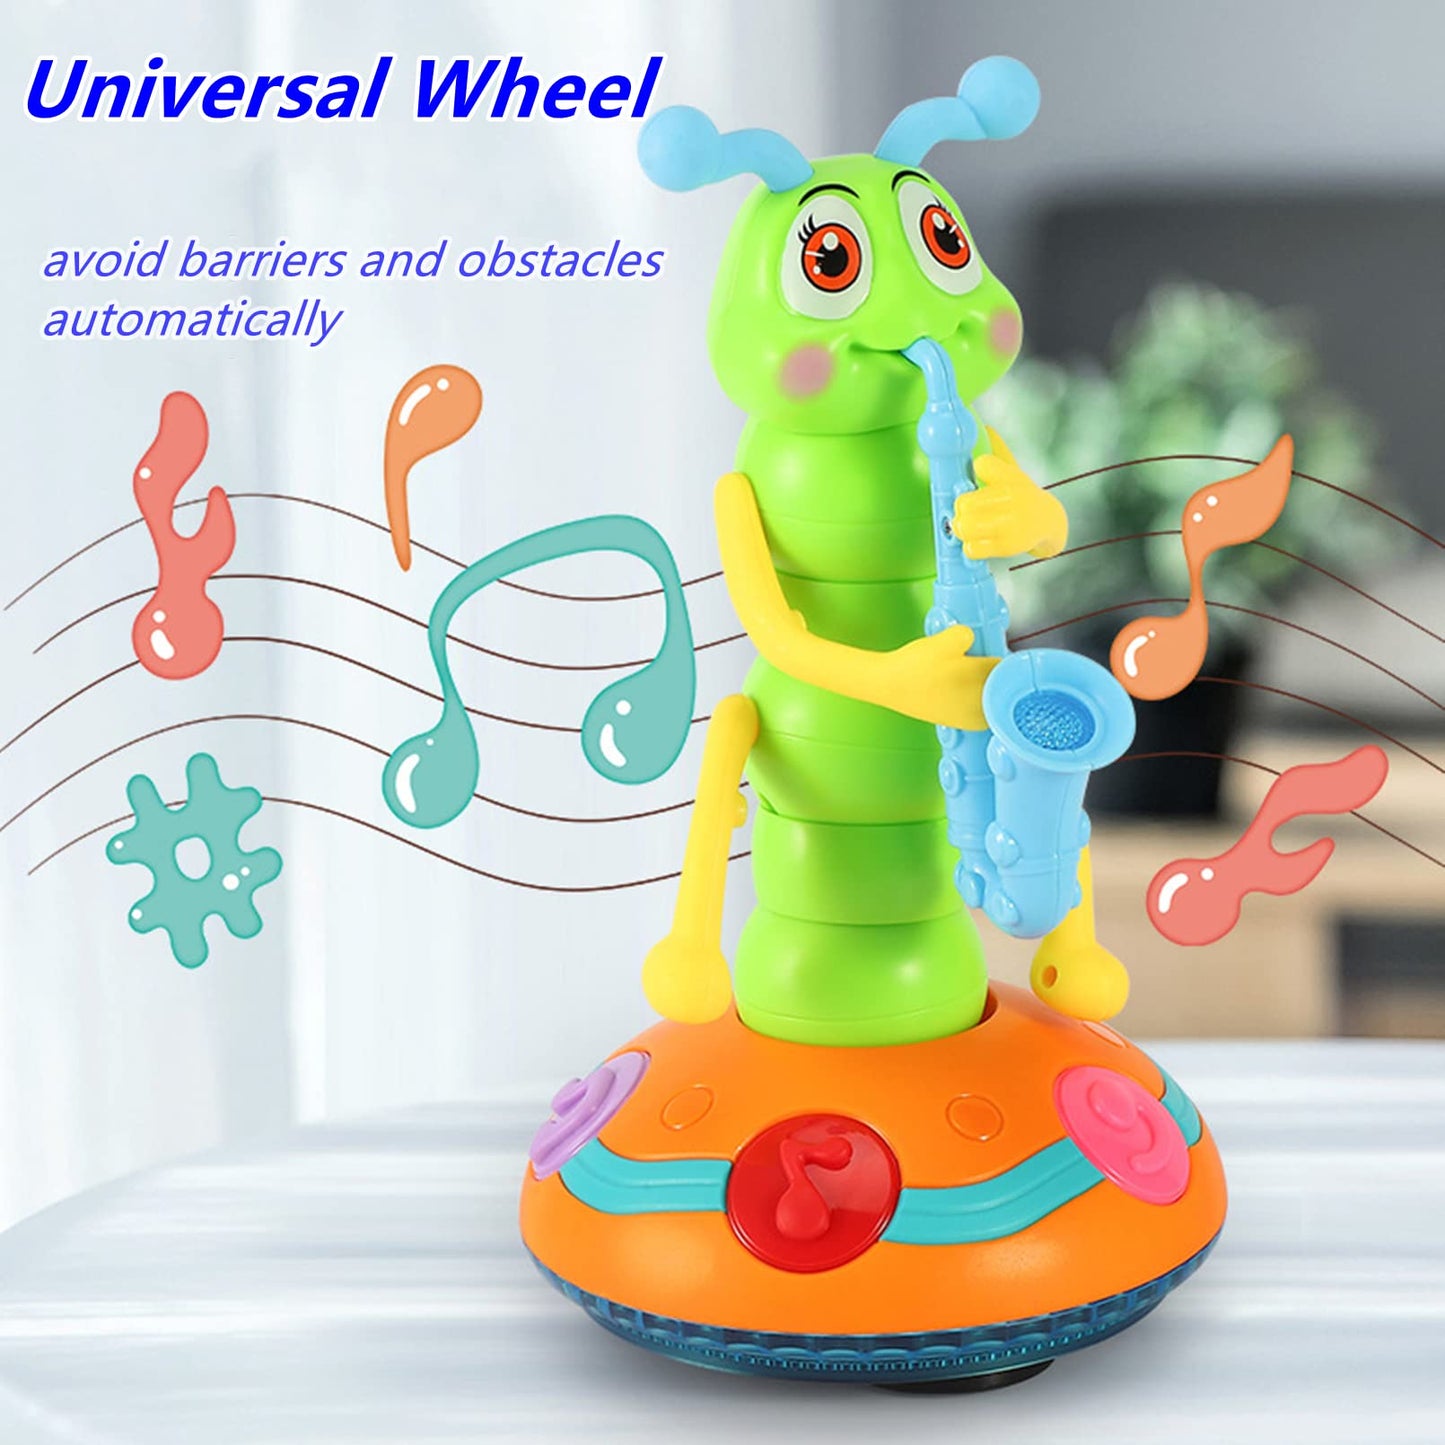 AM ANNA Dancing Baby Toys 6 to 12 Months, Musical, Light up, Spinning,Swing,Dance and Go Caterpillar Baby Toys, Interactive Light-up Gifts Baby Boy Toys for 1 2 3 4 5 Year Old Girls Kids (Caterpillar)